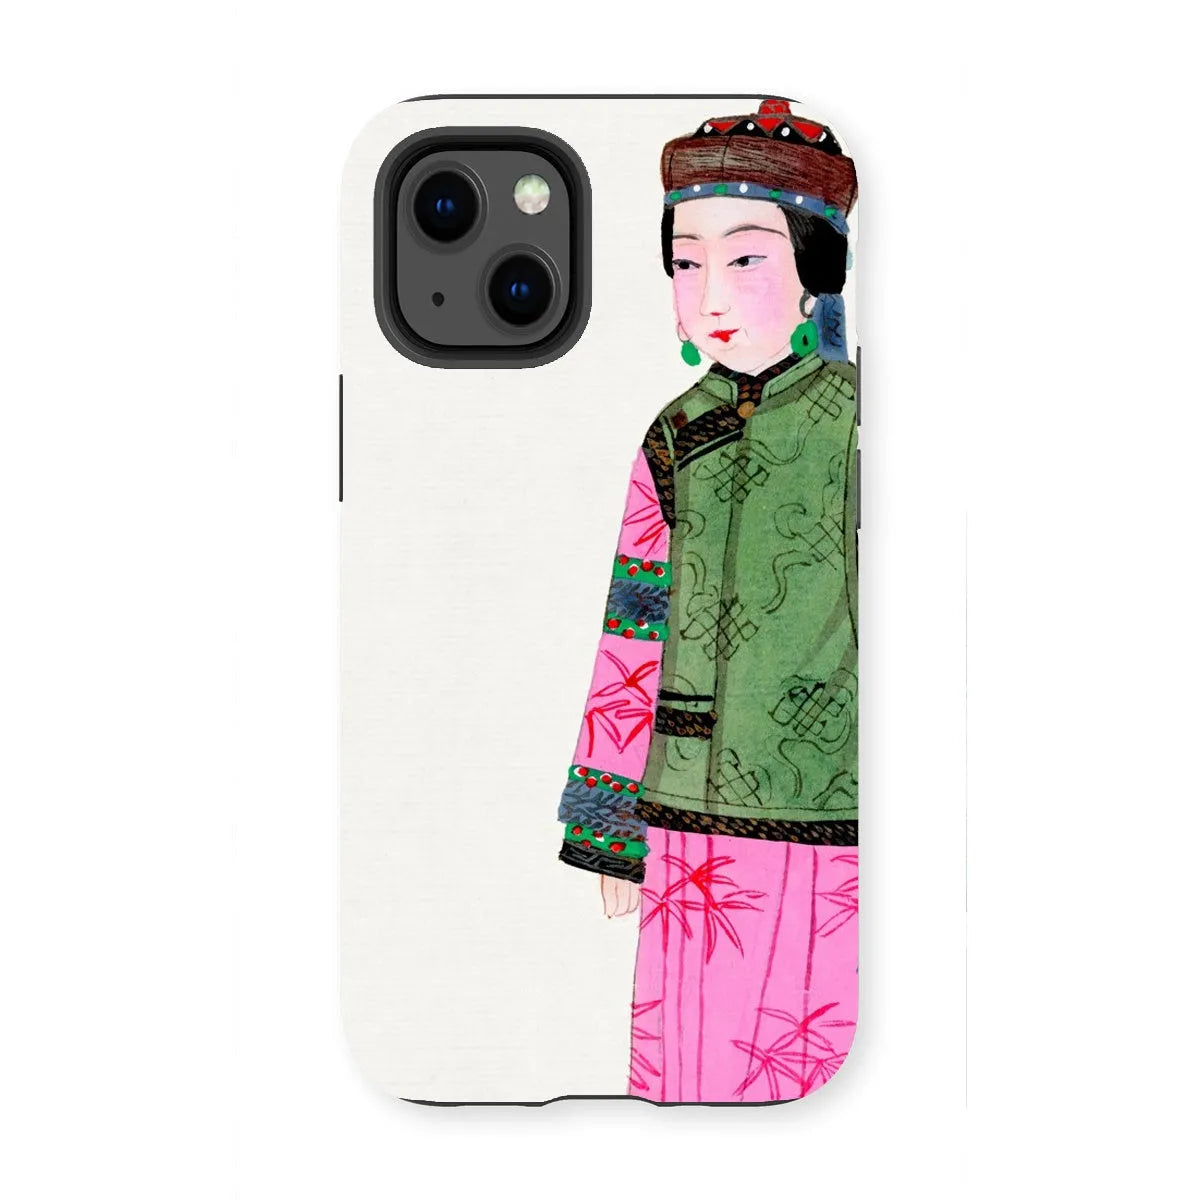 Noblewoman In Winter - Chinese Aesthetic Art Phone Case - Iphone 13 Mini / Matte - Mobile Phone Cases - Aesthetic Art